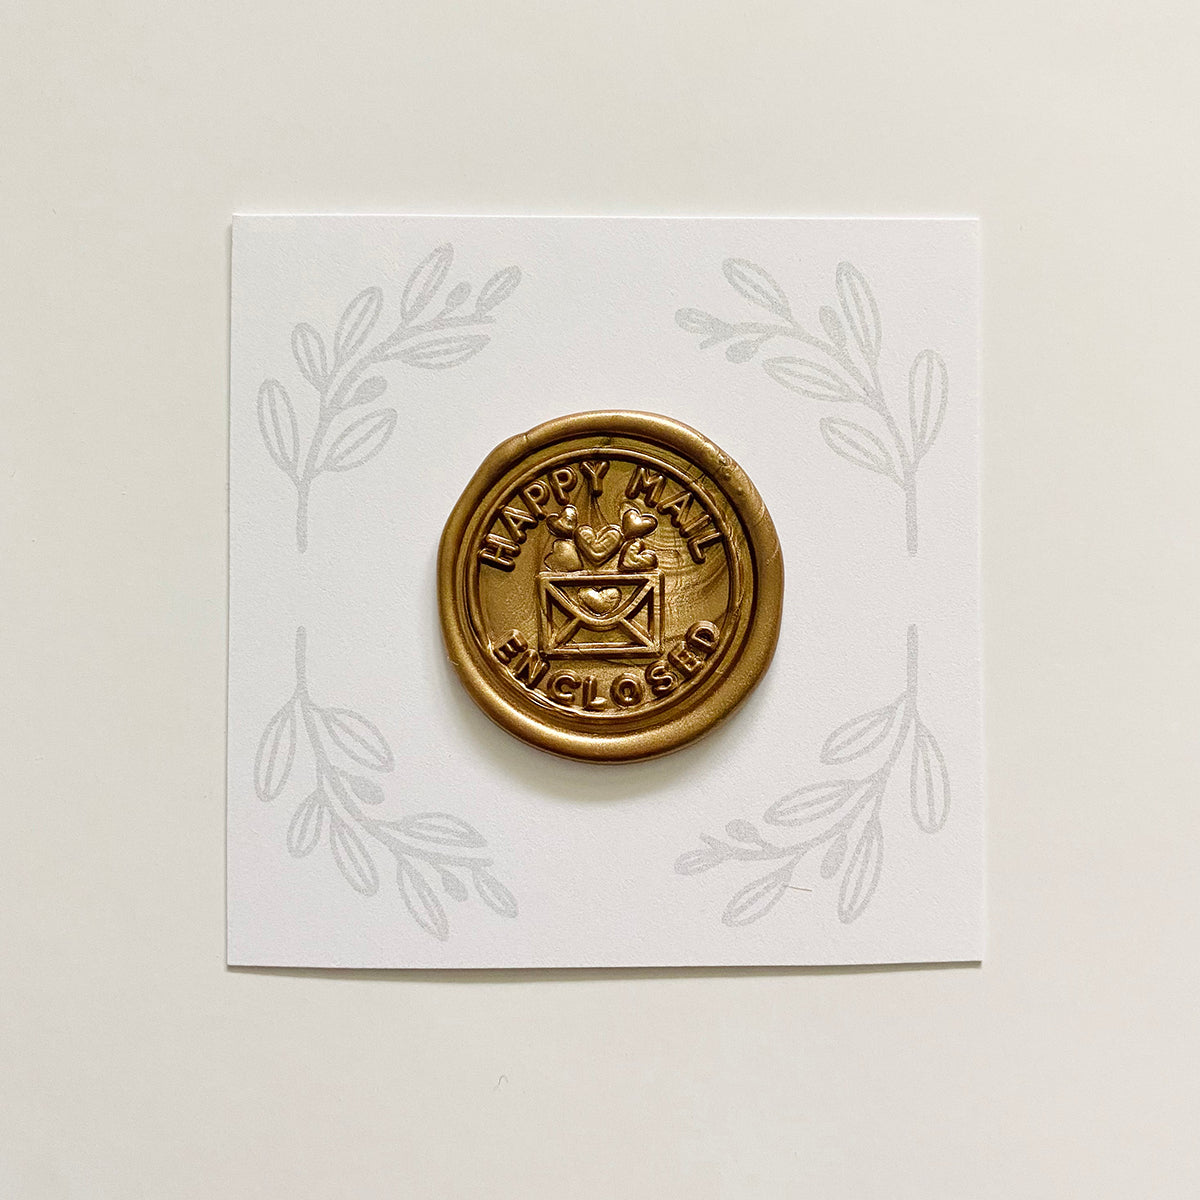 Happy Mail Enclosed Wax Stamp